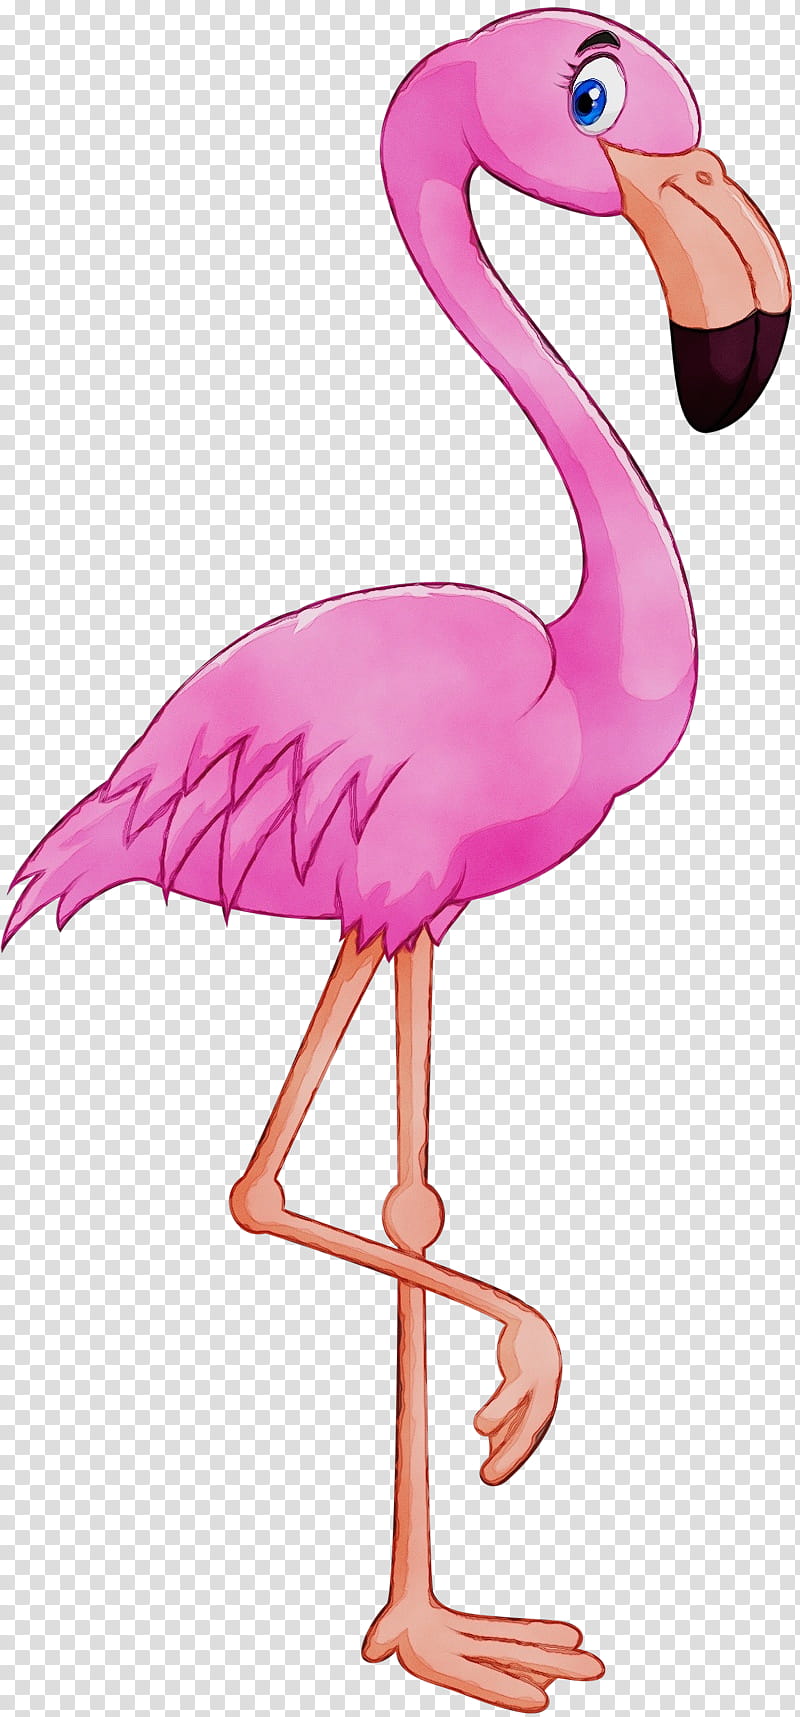 Flamingo Watercolor, Paint, Wet Ink, Greater Flamingo, Phoenicopterus, Tshirt, Flamenco, Pink transparent background PNG clipart